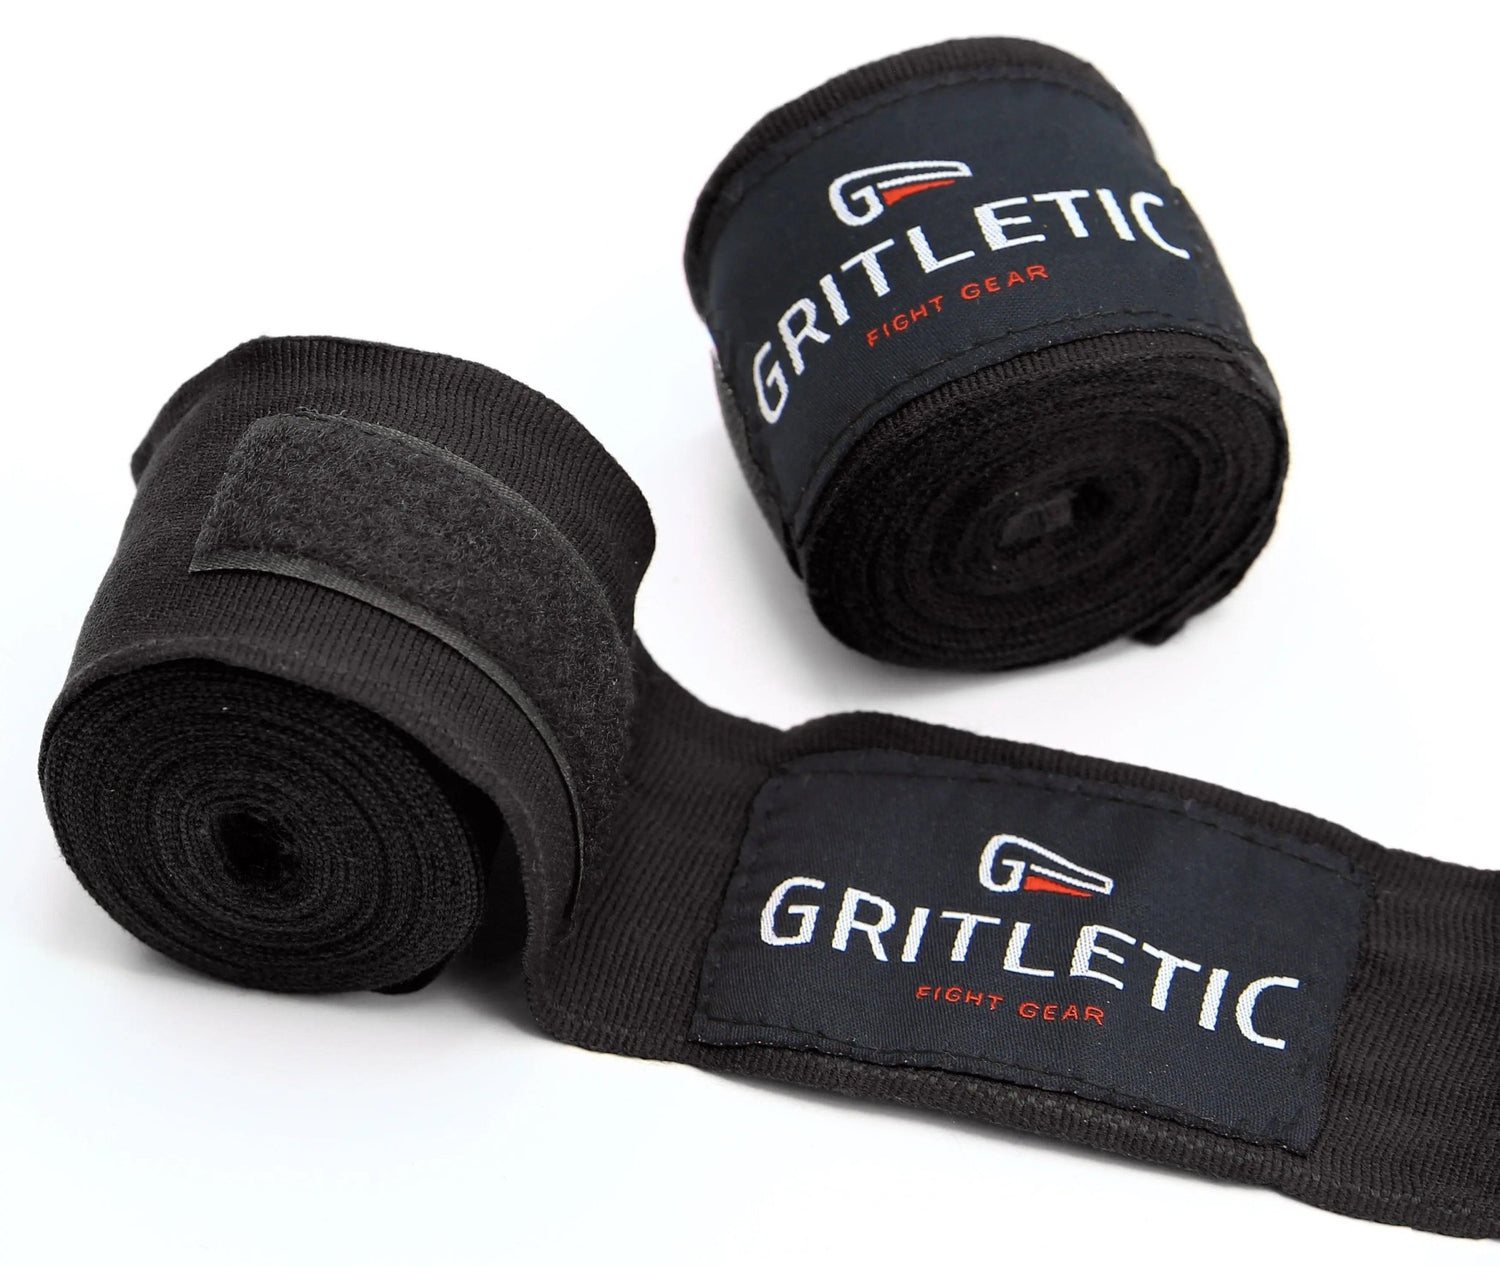 Gritletic Boxing Hand Wraps- Made from Premium black Cotton Blended Fabric